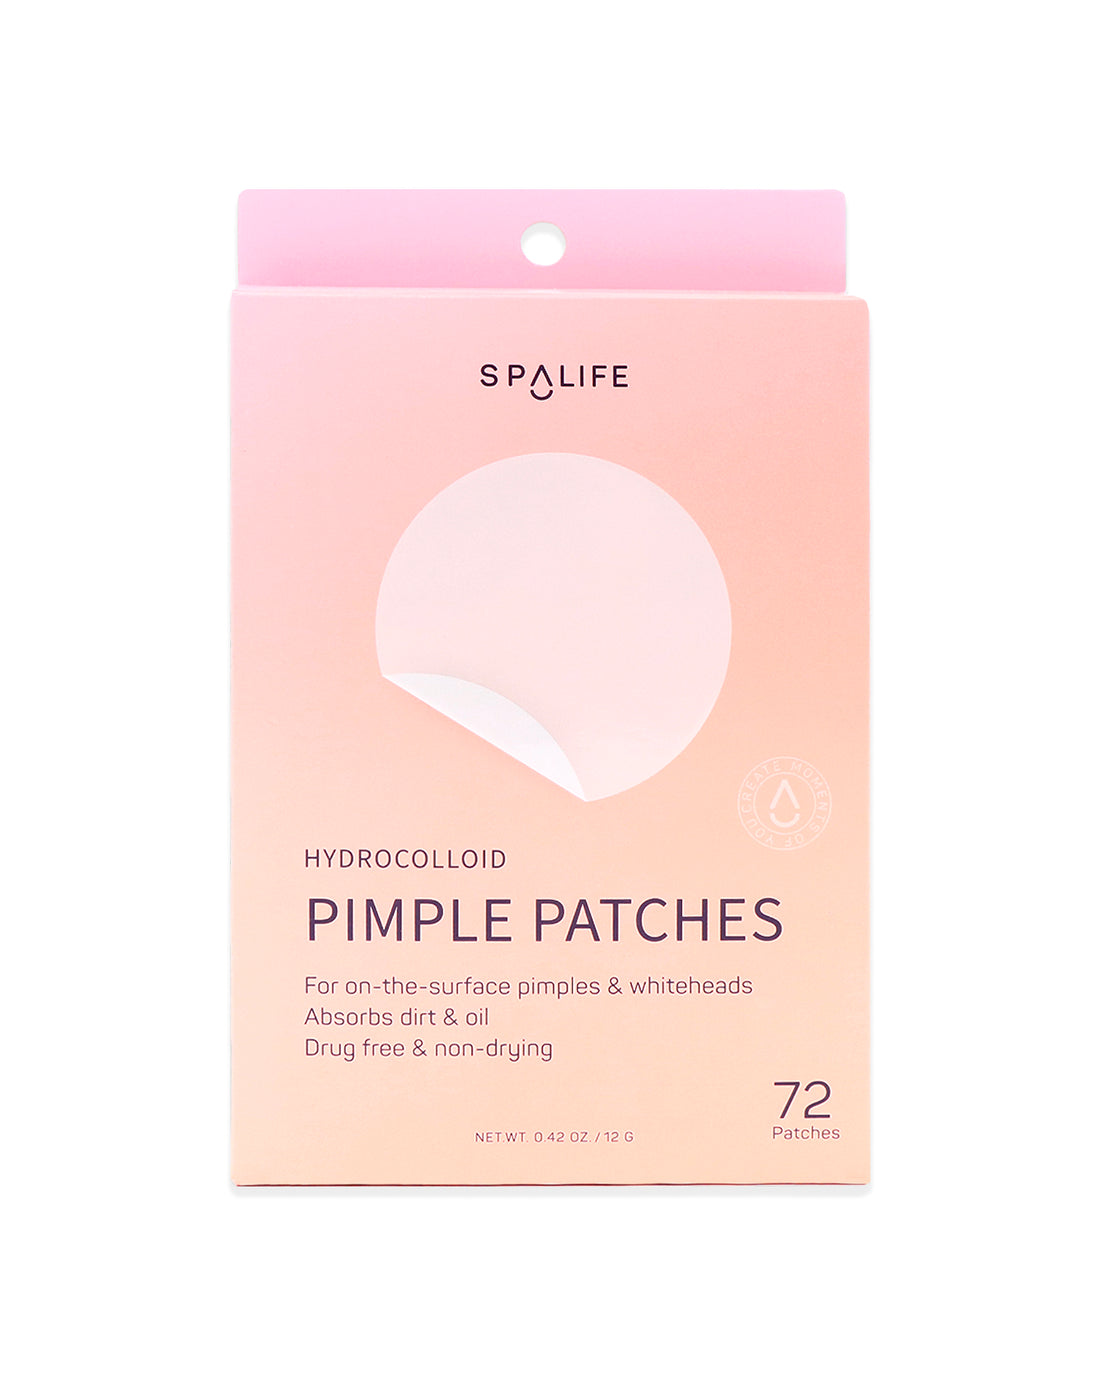 Hydrocolloid_pimple_patches_pa-916